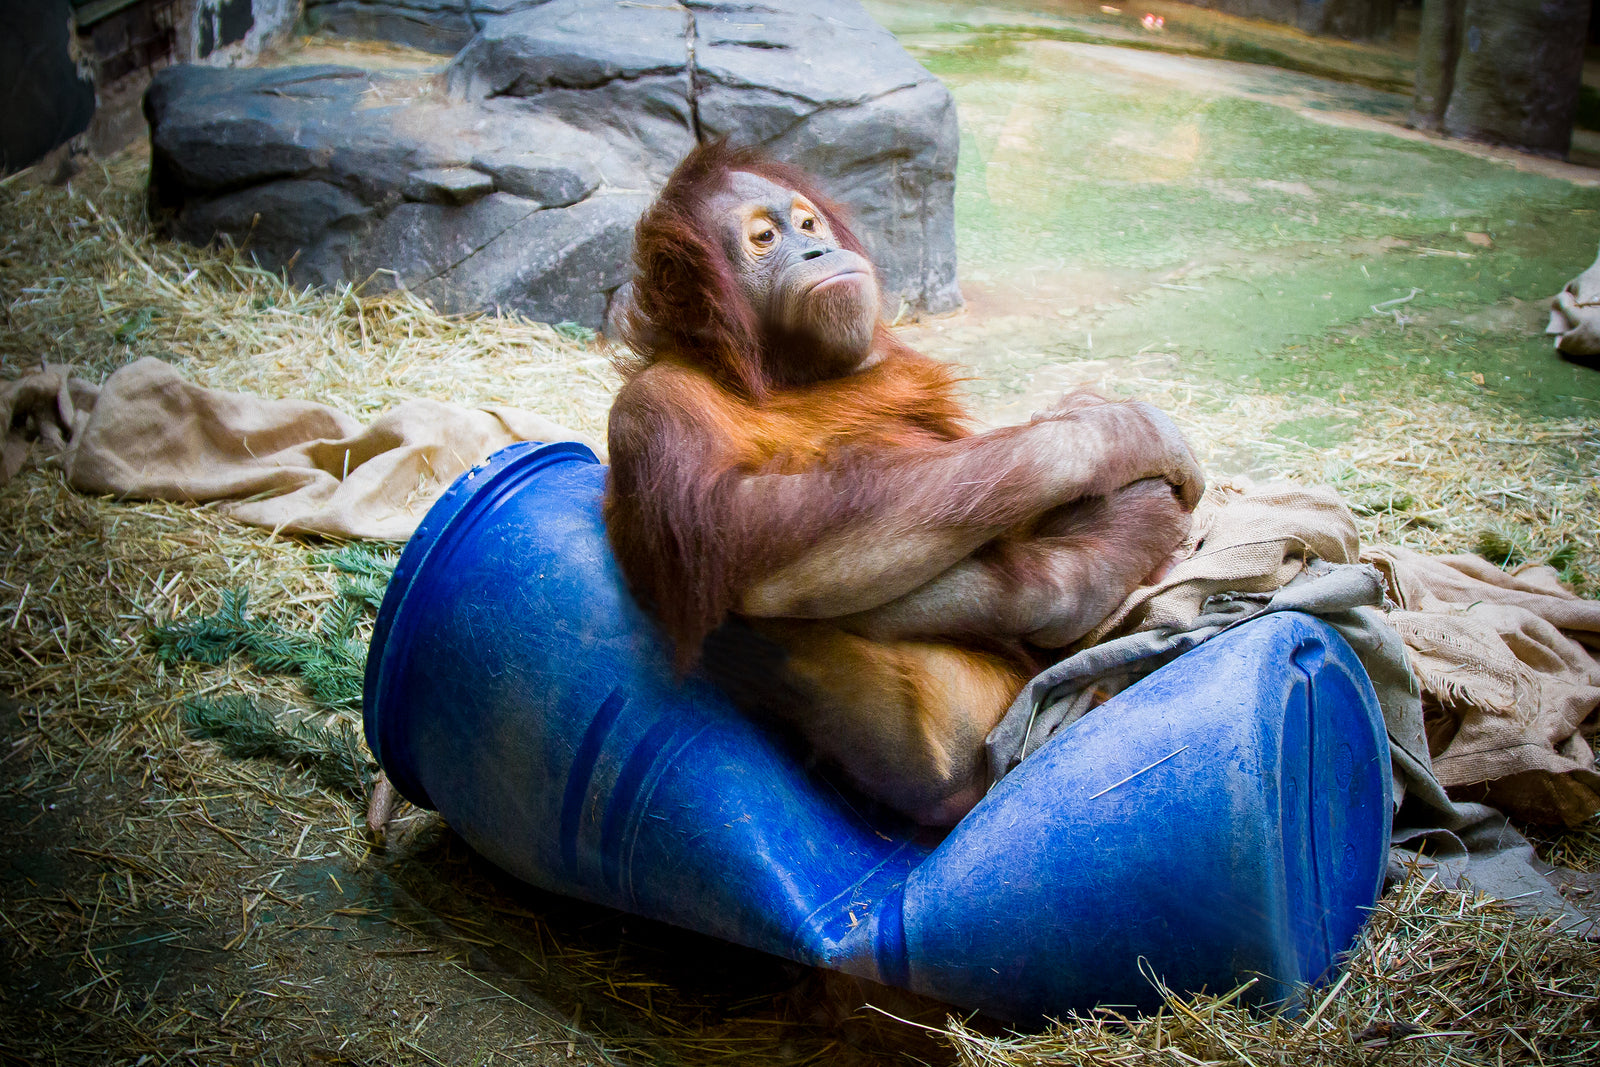 Free Zoo Entry To Red Heads On World Orangutan Day